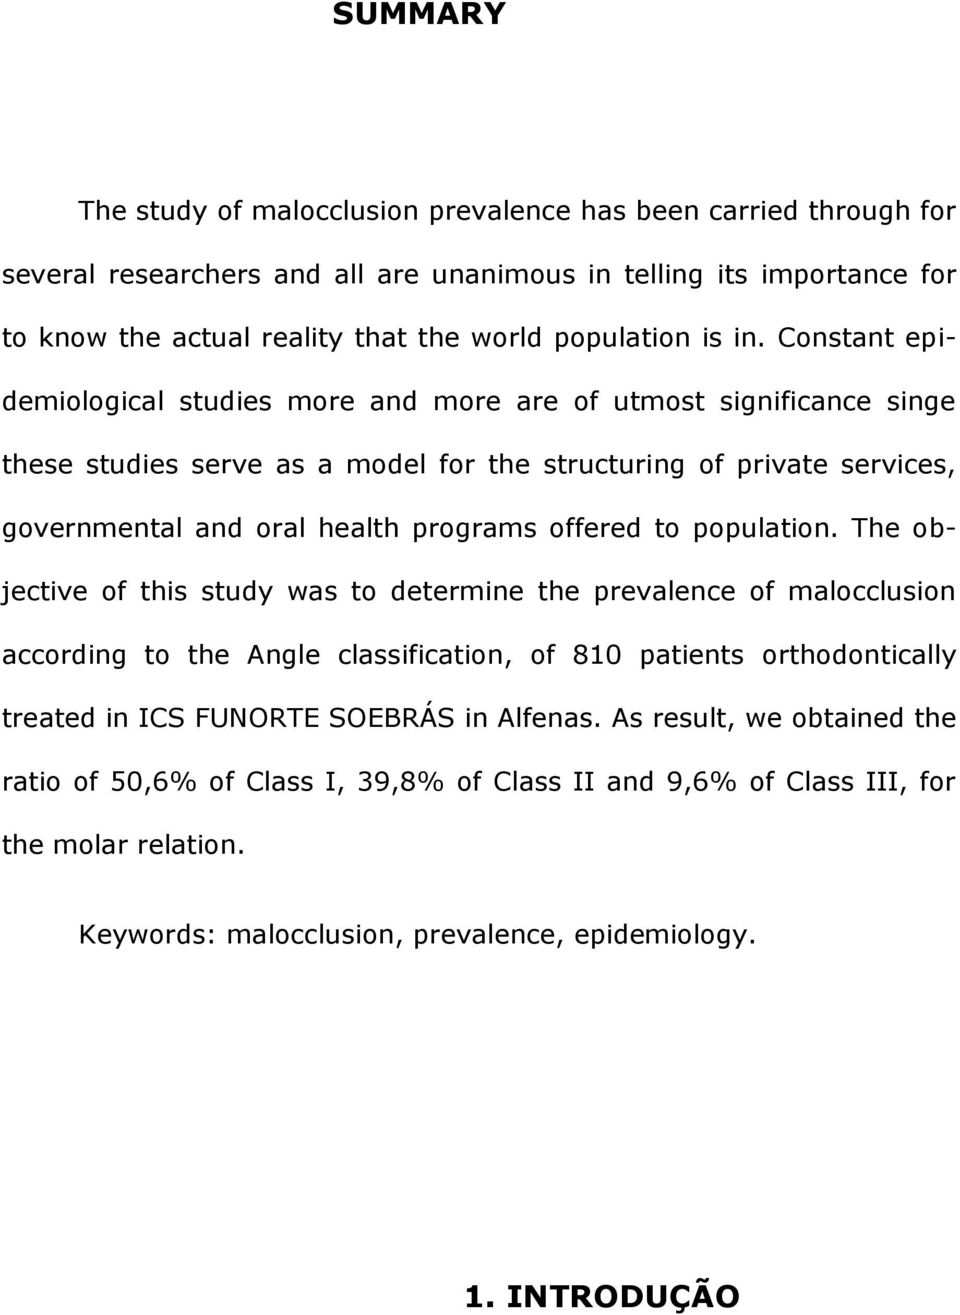 Constant epidemiological studies more and more are of utmost significance singe these studies serve as a model for the structuring of private services, governmental and oral health programs offered